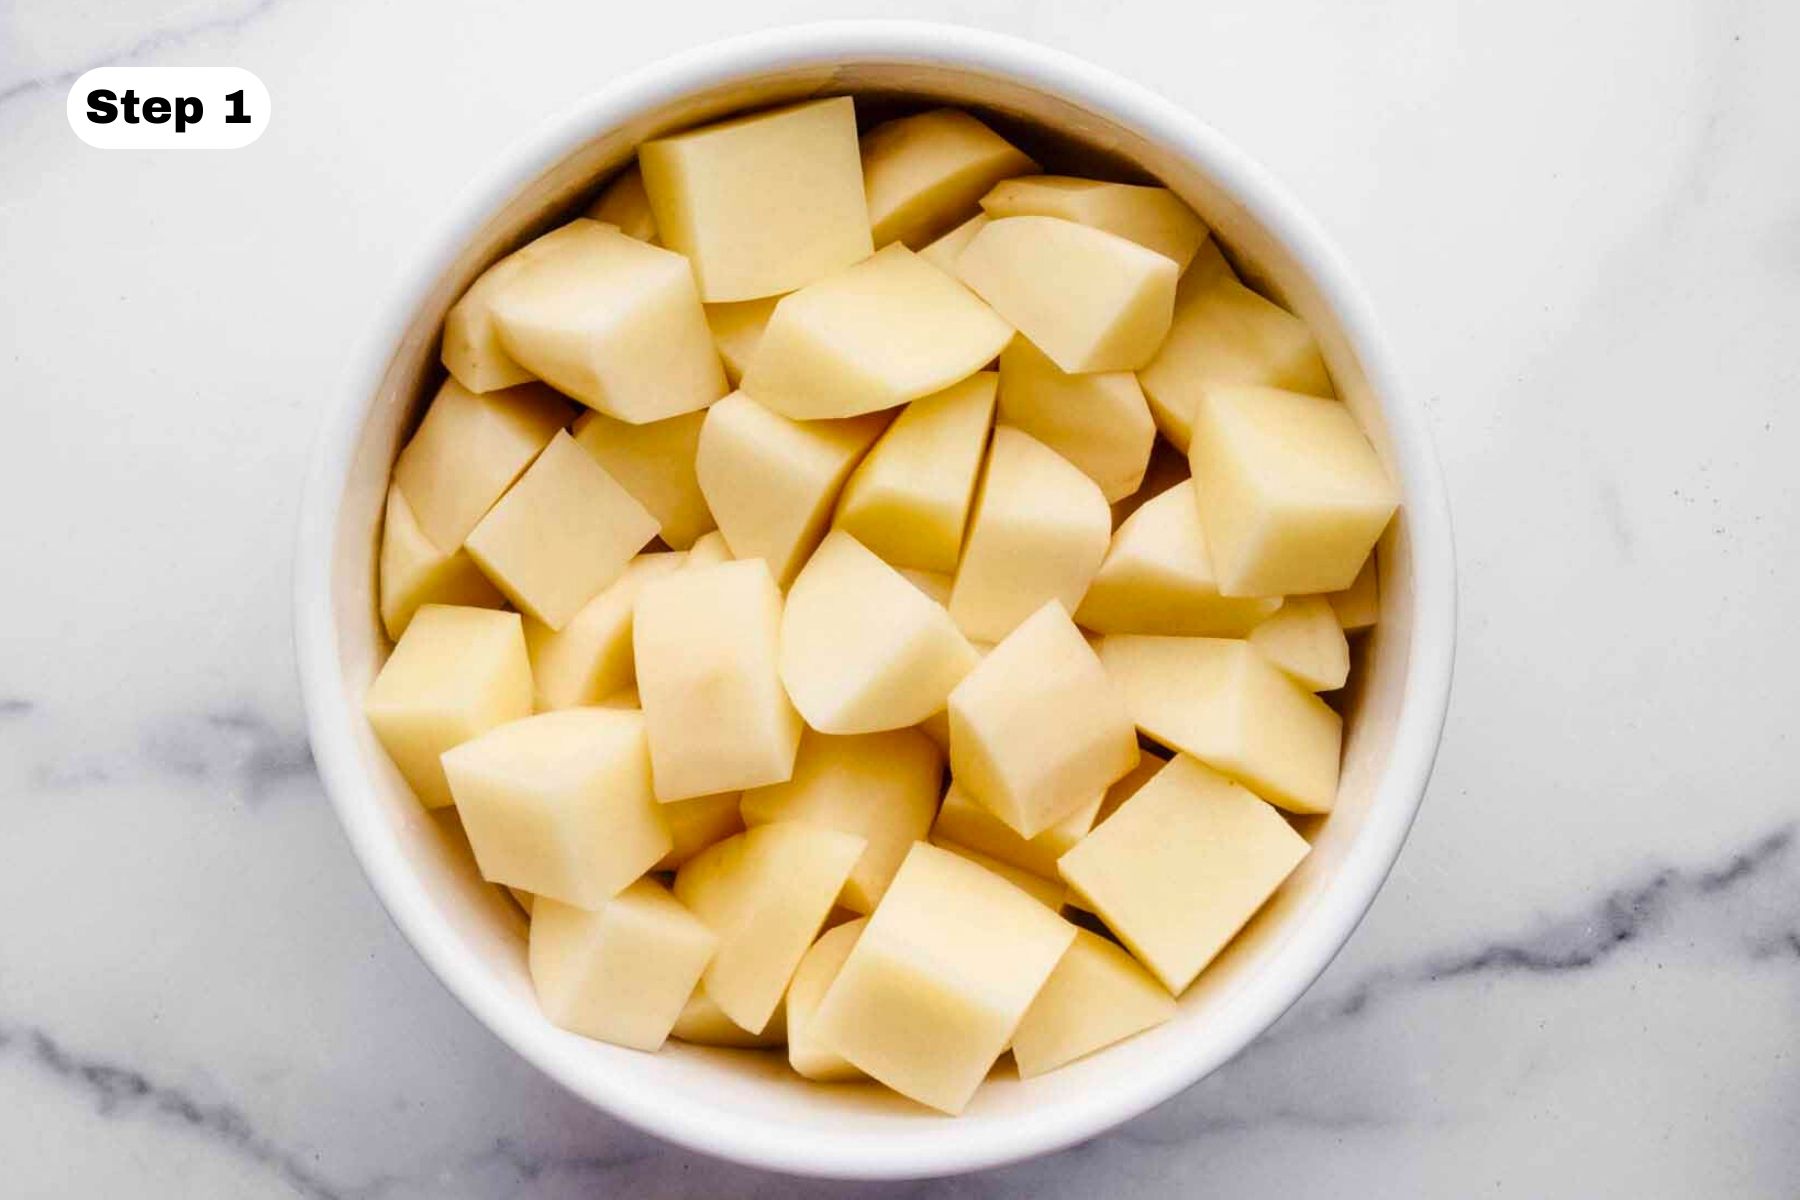 Peeled and cubed potatoes in a white bowl.